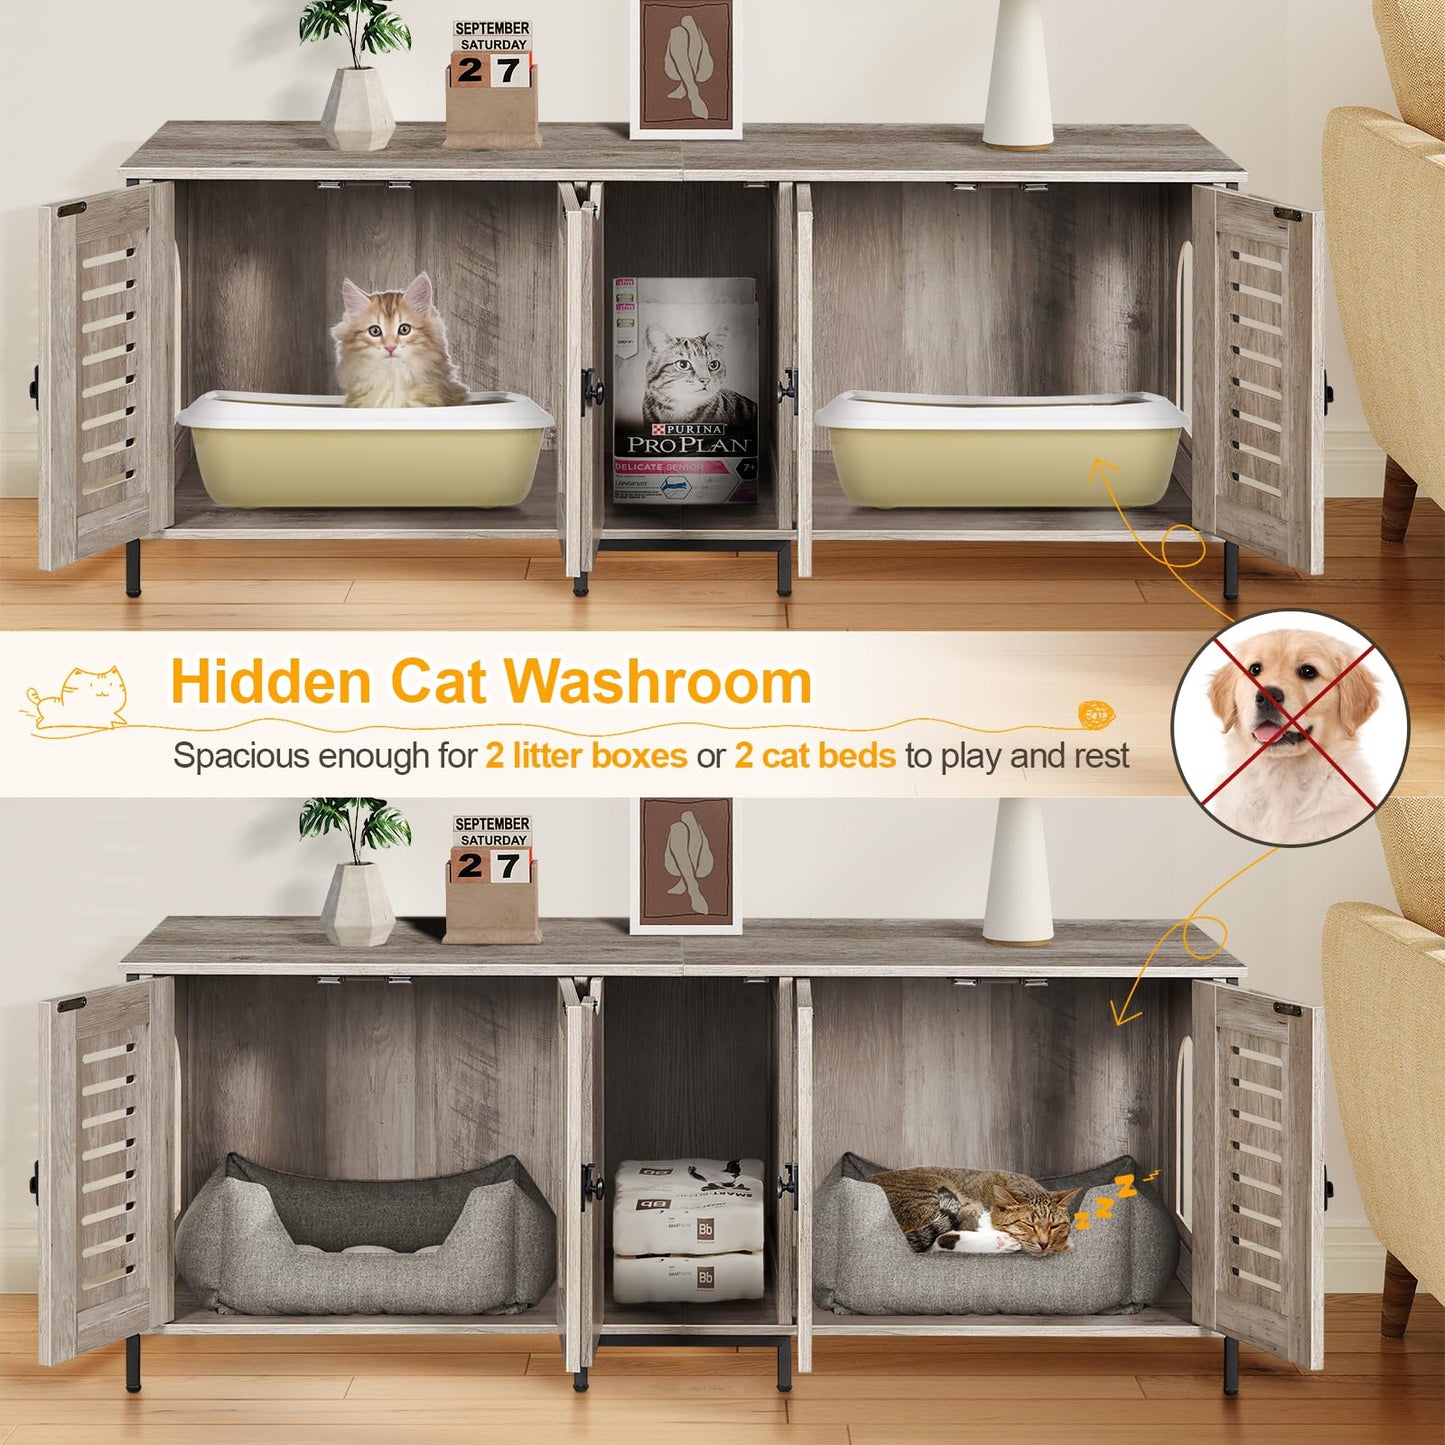 Snughome Cat Litter Box Enclosure for 2 Cats, 51.18’’ Hidden Cat Litter Box Furniture with Double Room, Large Wooden Cat Washroom with Storage Cabinet, Indoor Cat House TV Stand Side Table, Grey